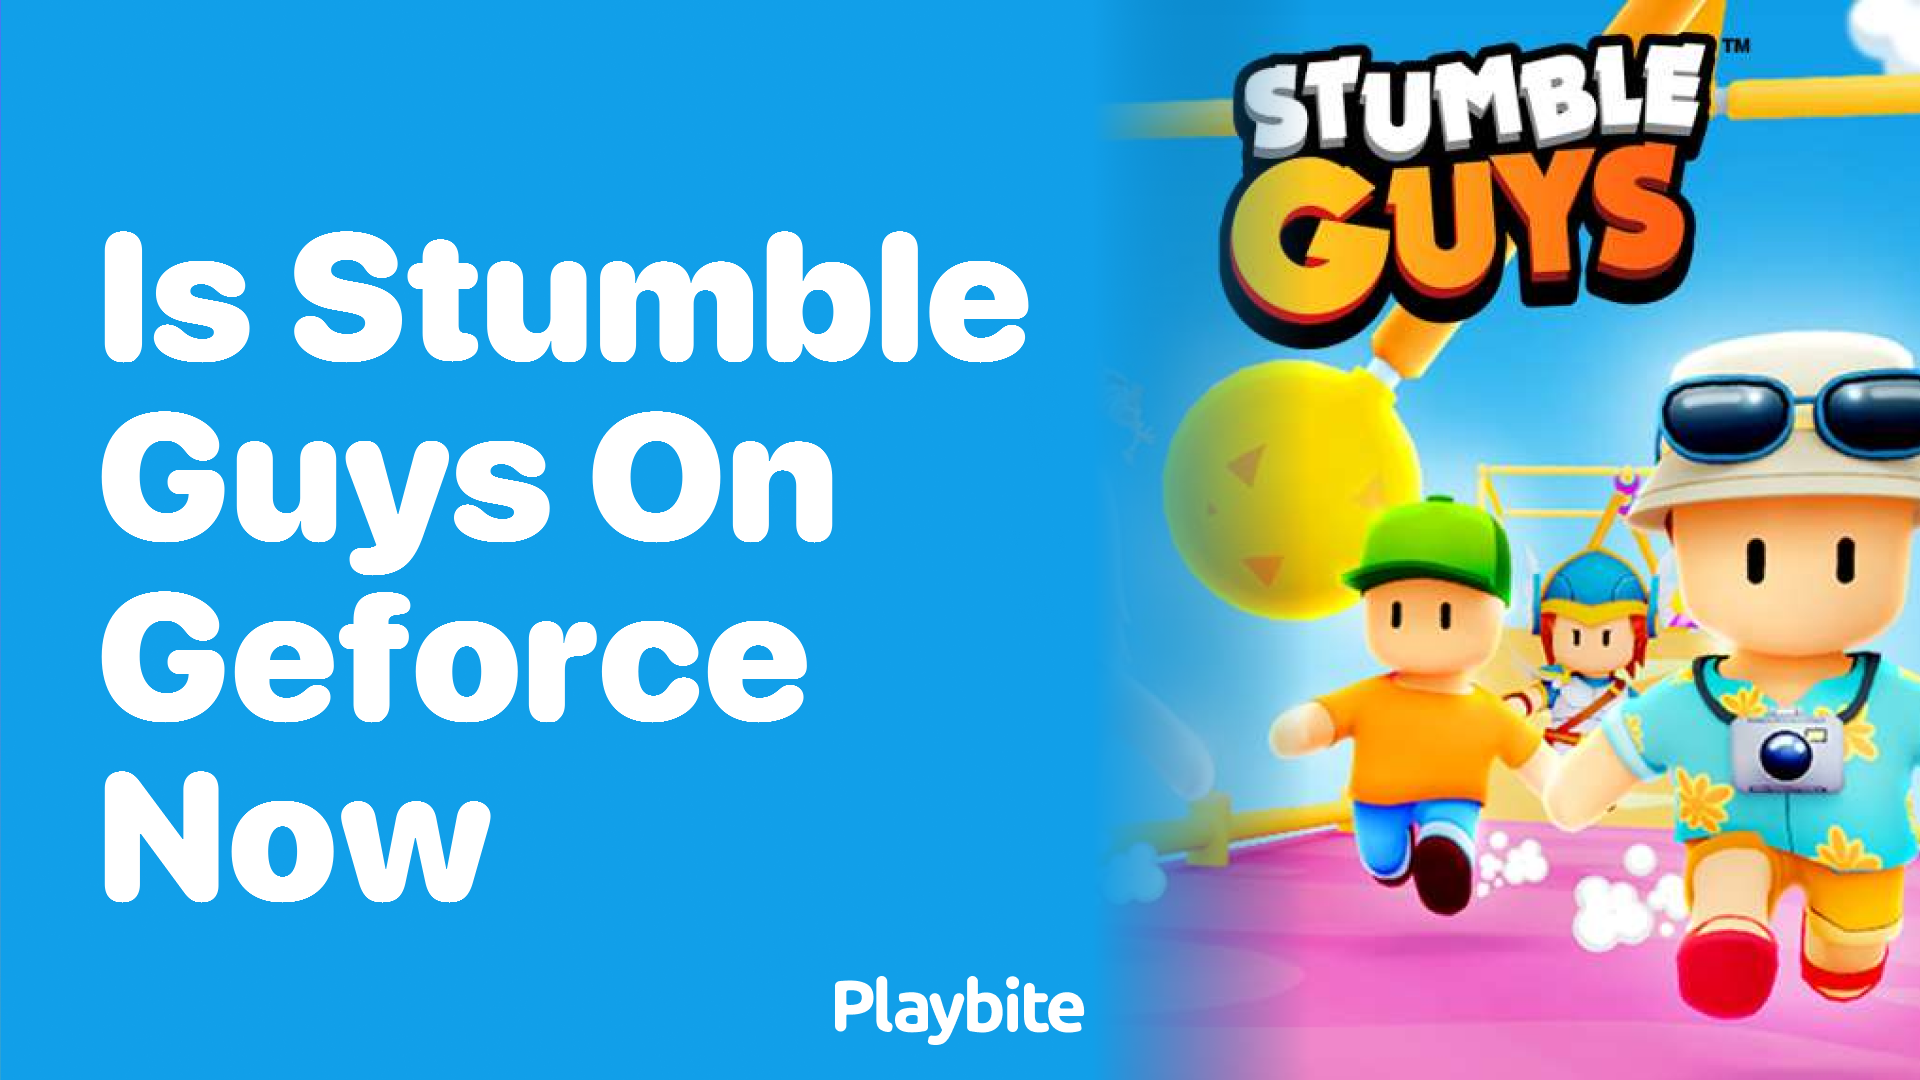 Is Stumble Guys Available on GeForce Now?